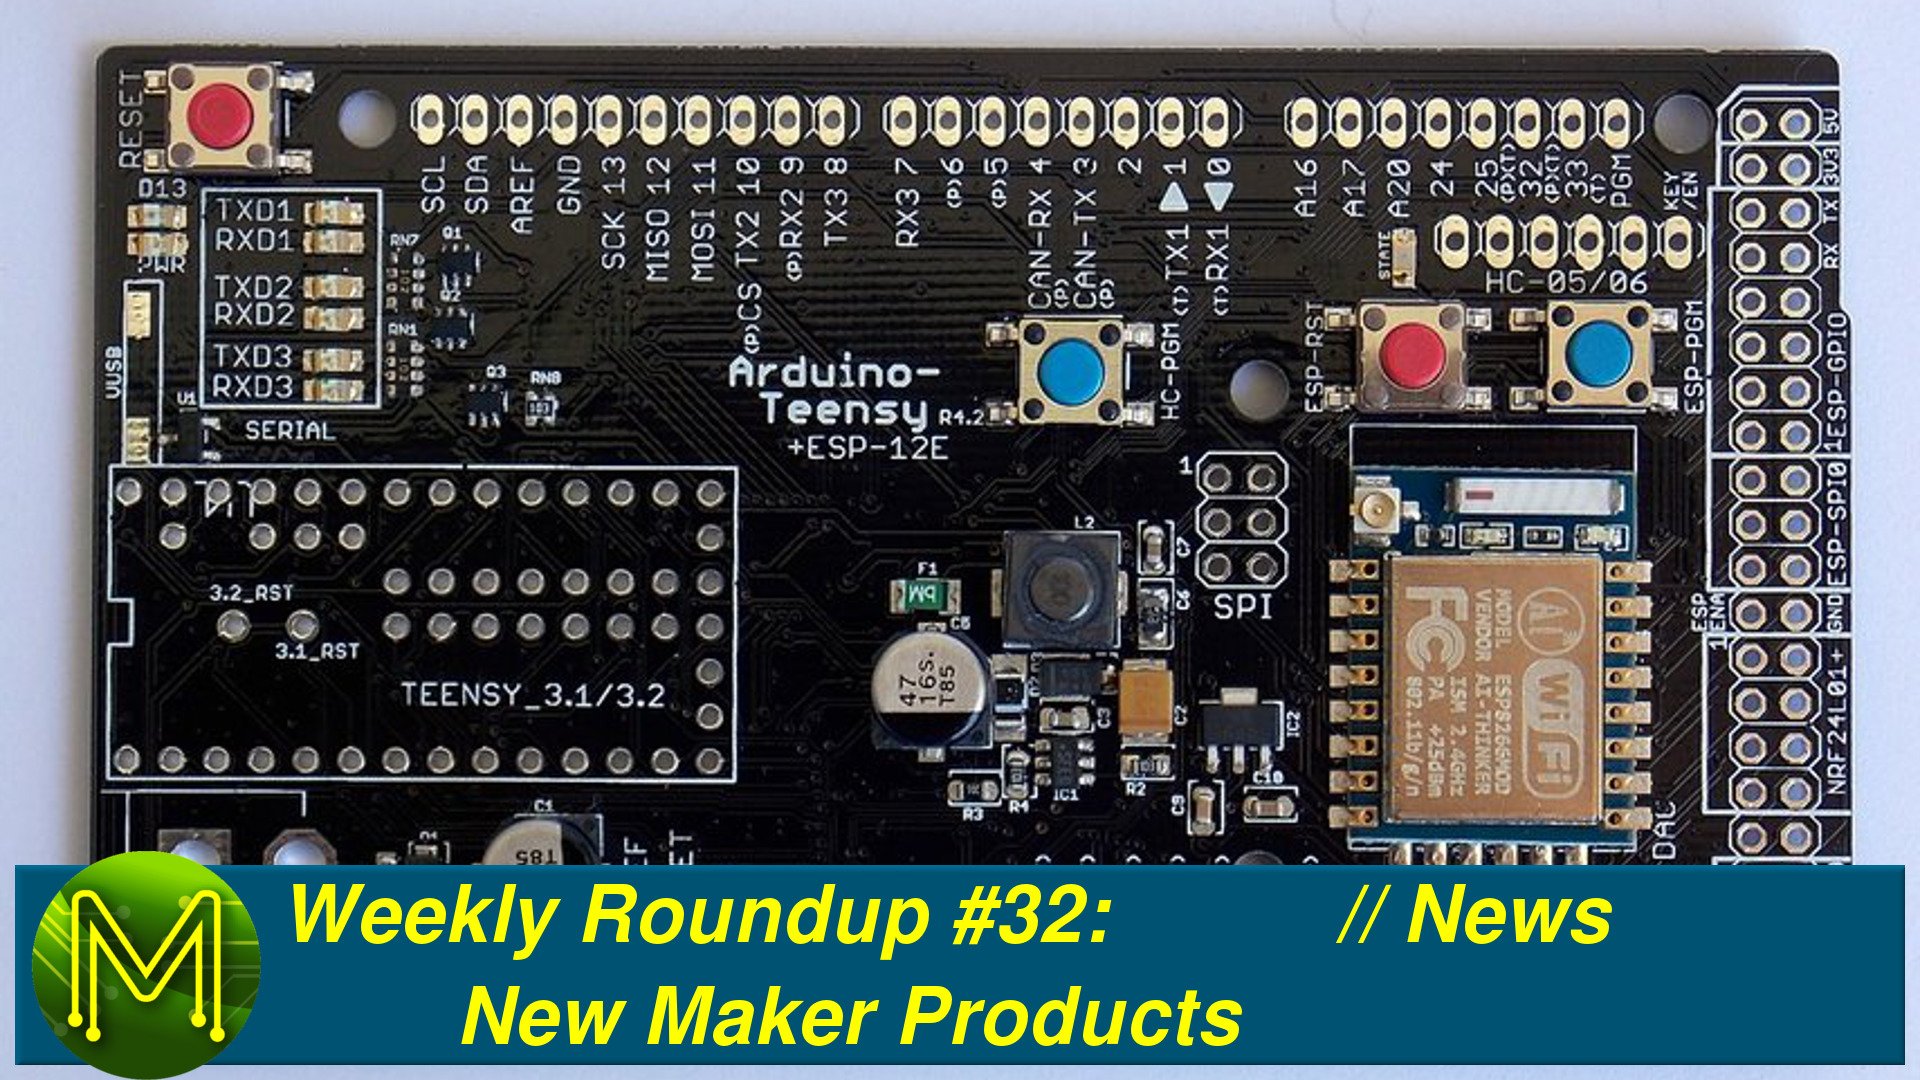 Weekly Roundup #32 - New Maker Products // News